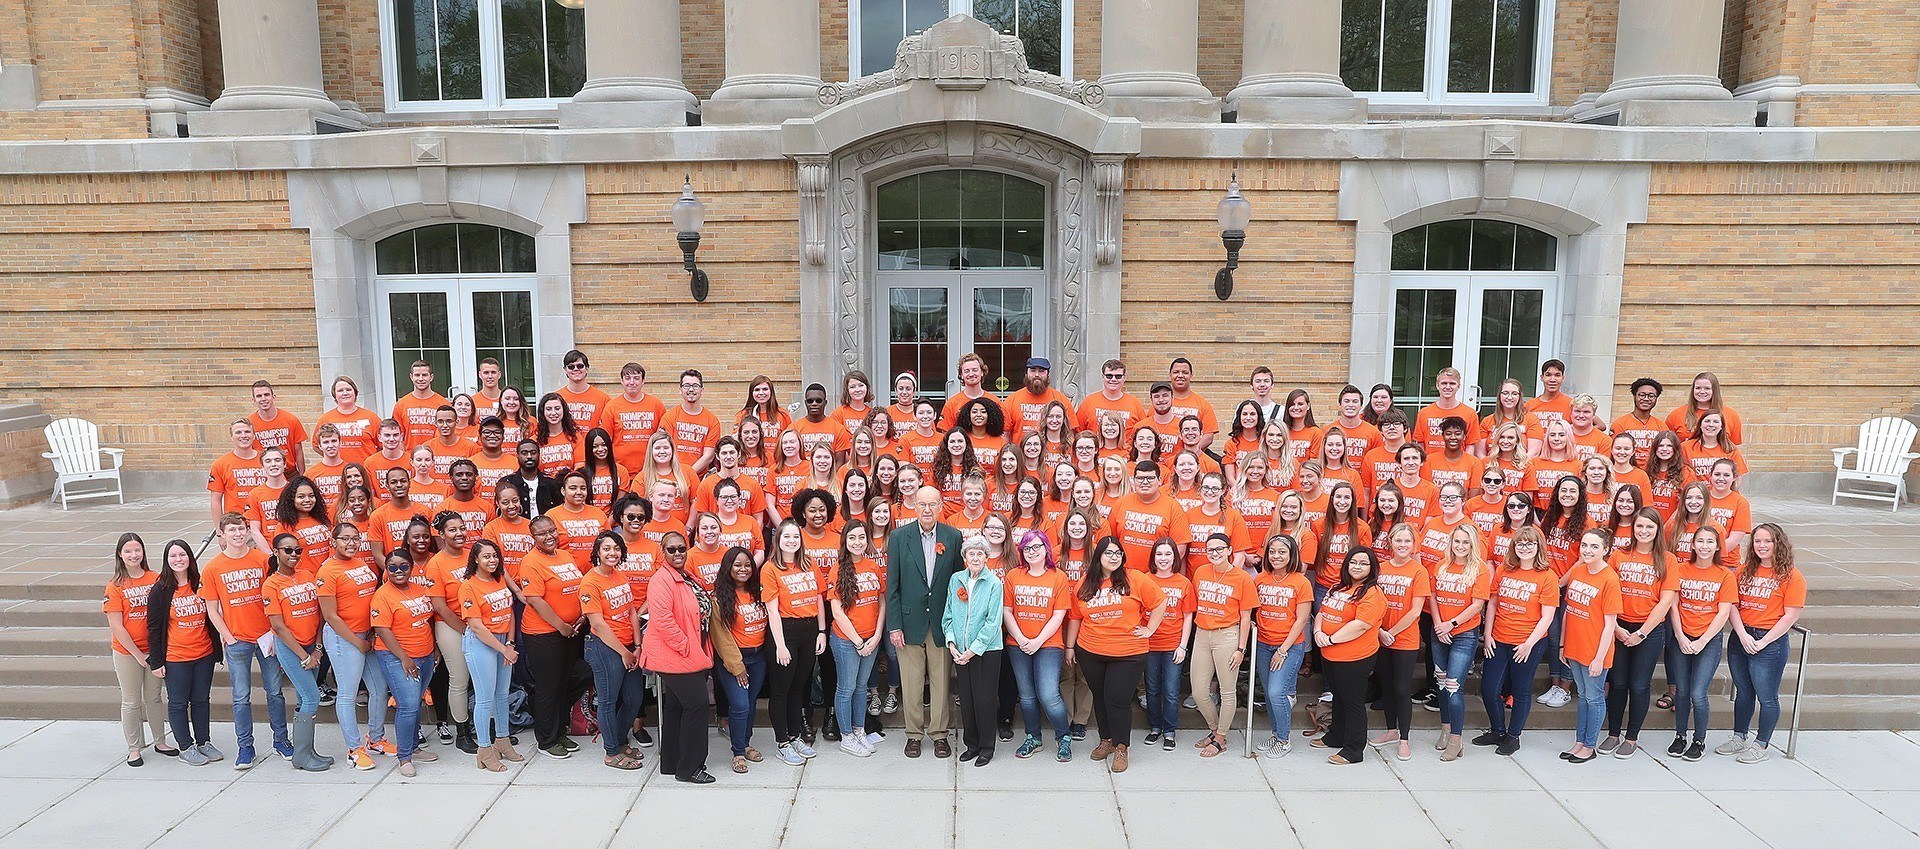 “Thompson Family Scholars honor and celebrate Bob and Ellen Thompson on May 10, 2018 during the Bowen-Thompson Quadrangle Dedication Ceremony recognizing the Thompson's generous support of scholarships for BGSU students.